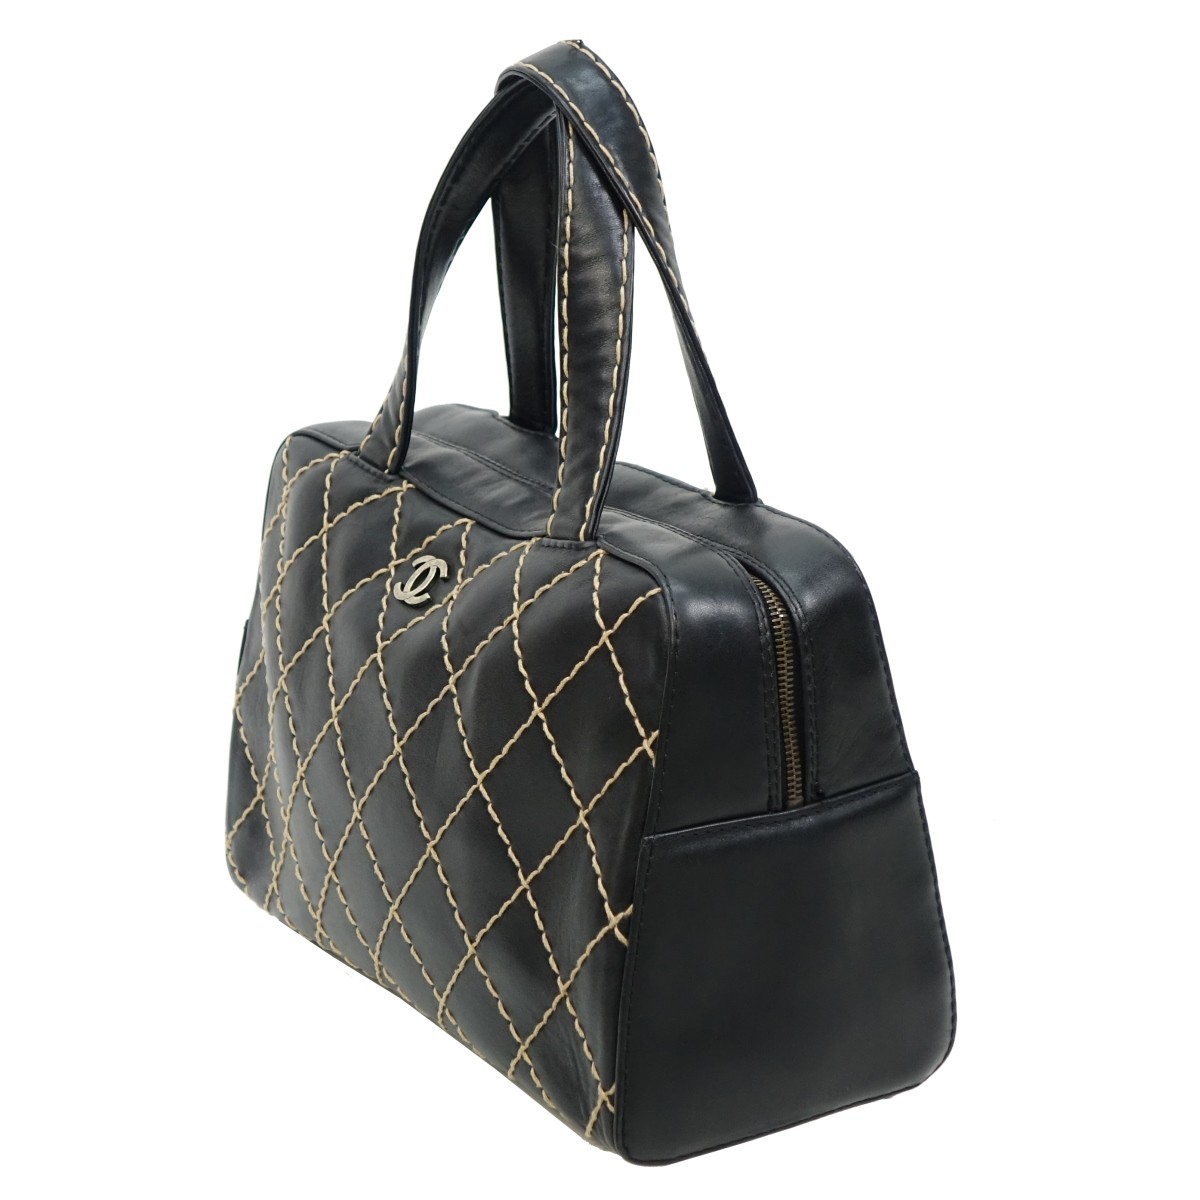 Chanel Black Calf Leather Bowling Bag | Kodner Auctions